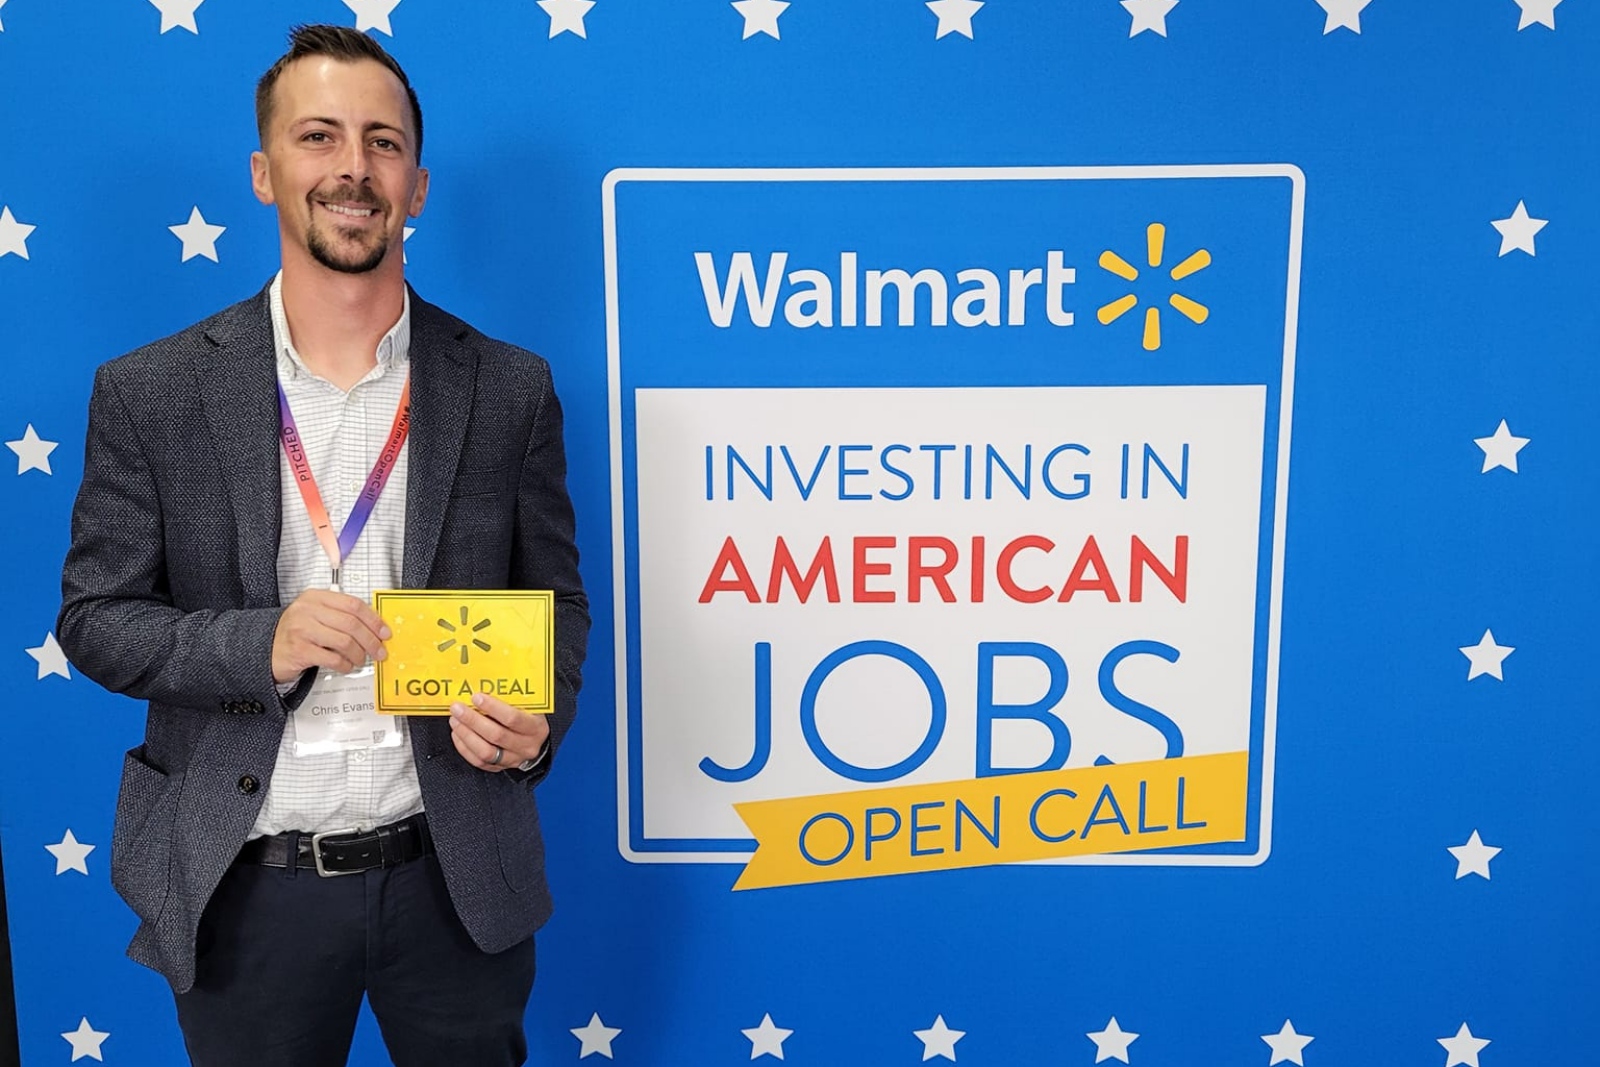 Chris Evans, of Evans Food Company, poses in front of a blue backdrop with the words "Walmart, Investing in American Jobs Open Call" printed on it